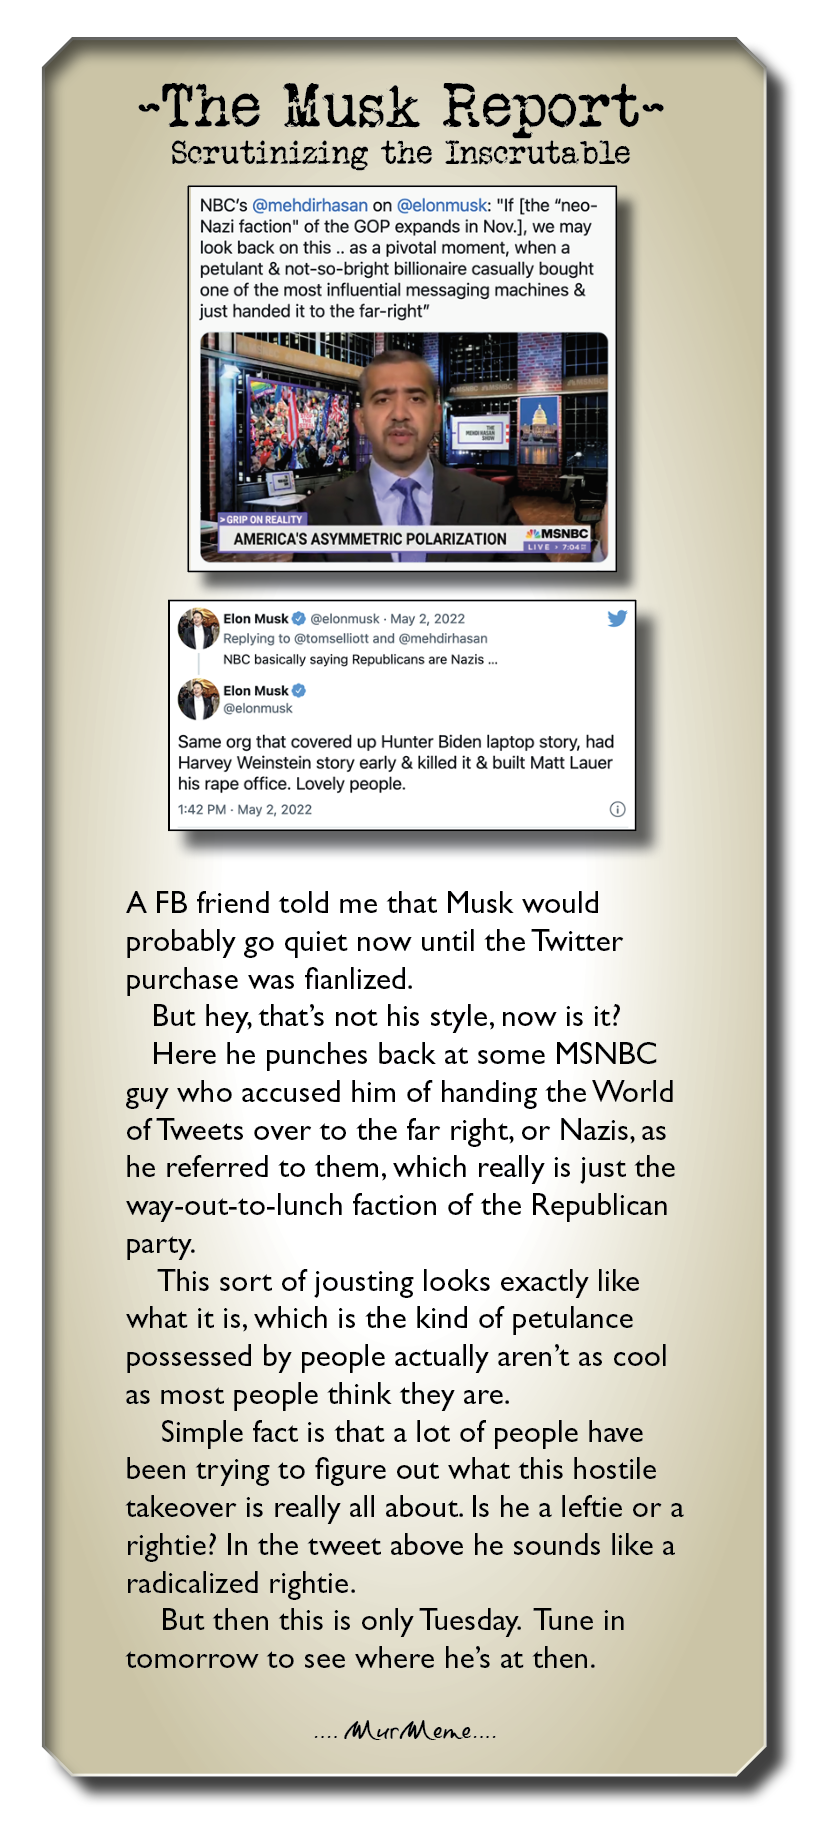 ~The Musk Report-

Serutinizing the Inscrutable

NBC's @mehdirhasan on @elonmusk: “If [the “neo-
Nazi faction" of the GOP expands in Nov.], we may
look back on this .. as a pivotal moment, when a
petulant & not-so-bright bilkonaire casually bought
one of the most influential messaging machines &
Just handed it to the far-nght”

Bh Fon Musk @ @elonmust May
Reptyng to @tomsesott and
NBC basically saying Republcans ae Nar.
oO Musk ©
Same org that covered up Hunter Biden laptop story, had

Harvey Weinstein story early & killed it & built Matt Laver
his rape office. Lovely people.

A FB friend told me that Musk would
probably go quiet now until the Twitter
purchase was fianlized.

But hey, that’s not his style, now is it?
Here he punches back at some MSNBC
guy who accused him of handing the World
of Tweets over to the far right, or Nazis, as
he referred to them, which really is just the
way-out-to-lunch faction of the Republican

party.

This sort of jousting looks exactly like
what it is, which is the kind of petulance
possessed by people actually aren't as cool
as most people think they are.

Simple fact is that a lot of people have
been trying to figure out what this hostile
takeover is really all about. Is he a leftie or a
rightie? In the tweet above he sounds like a
radicalized rightie.

But then this is only Tuesday. Tune in
tomorrow to see where he’s at then.

Aur MA ene